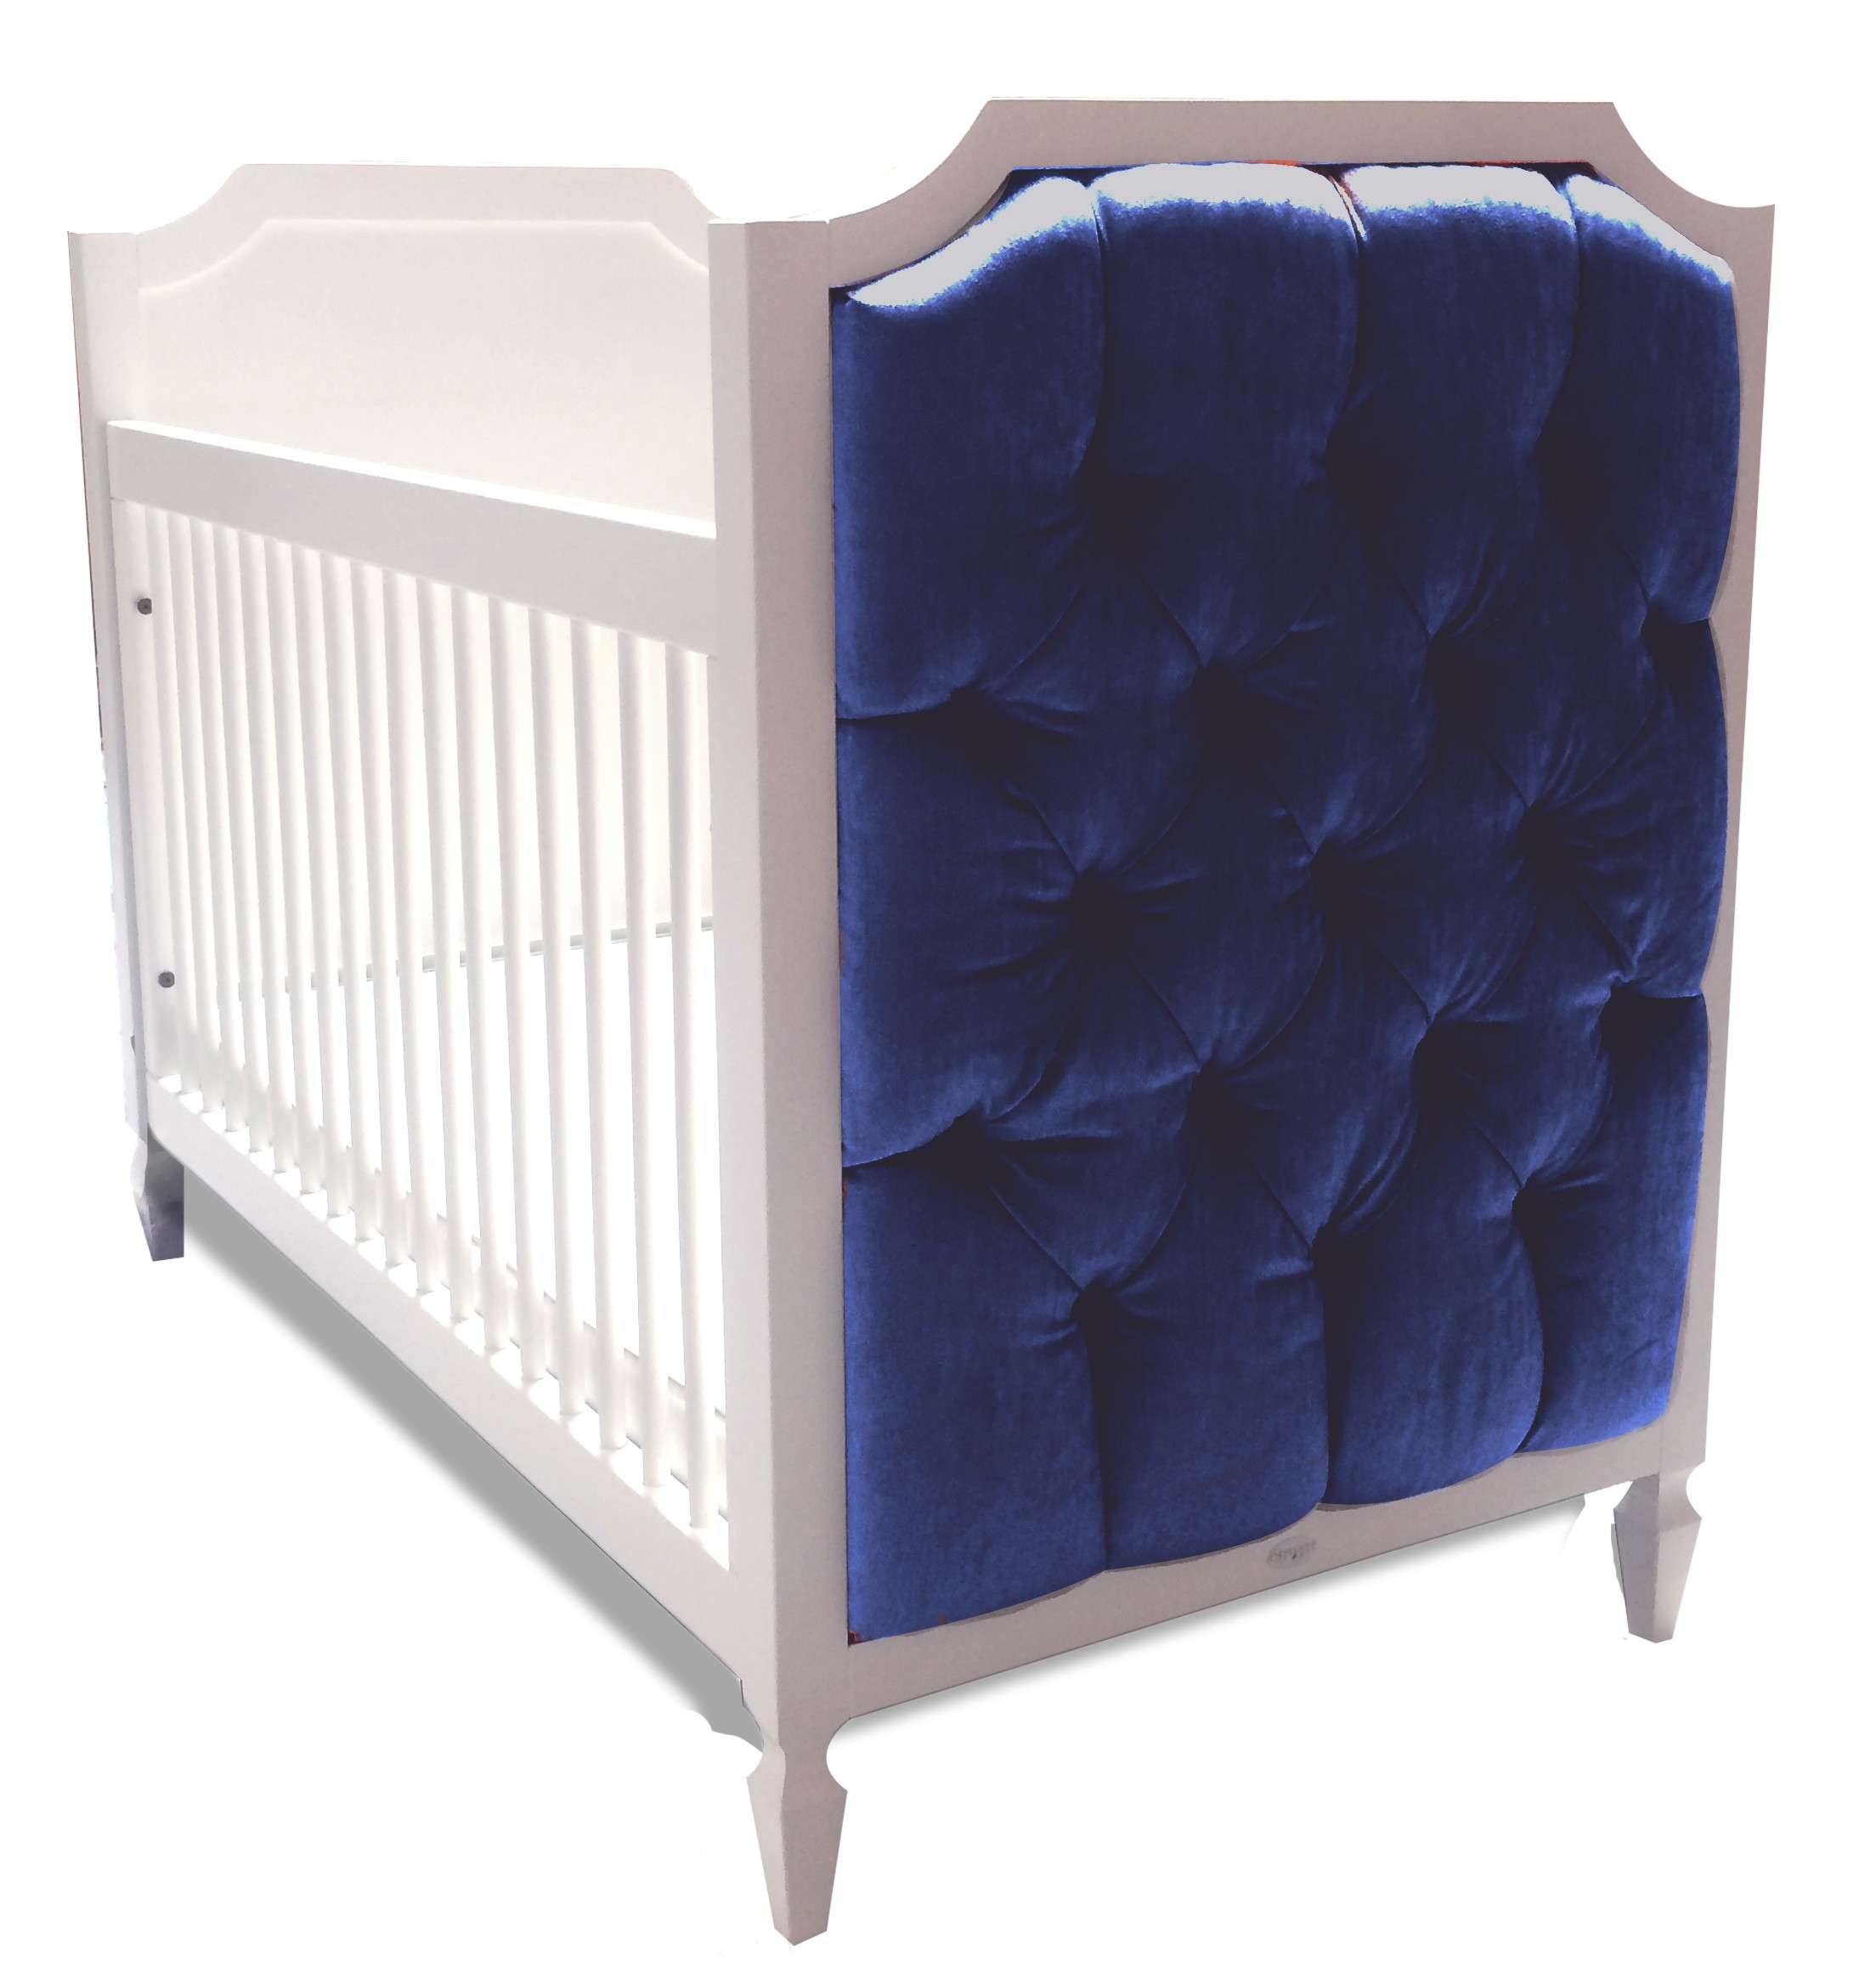 Beverly Crib With Tufted Panels In Majestic Blue Velvet By Newport